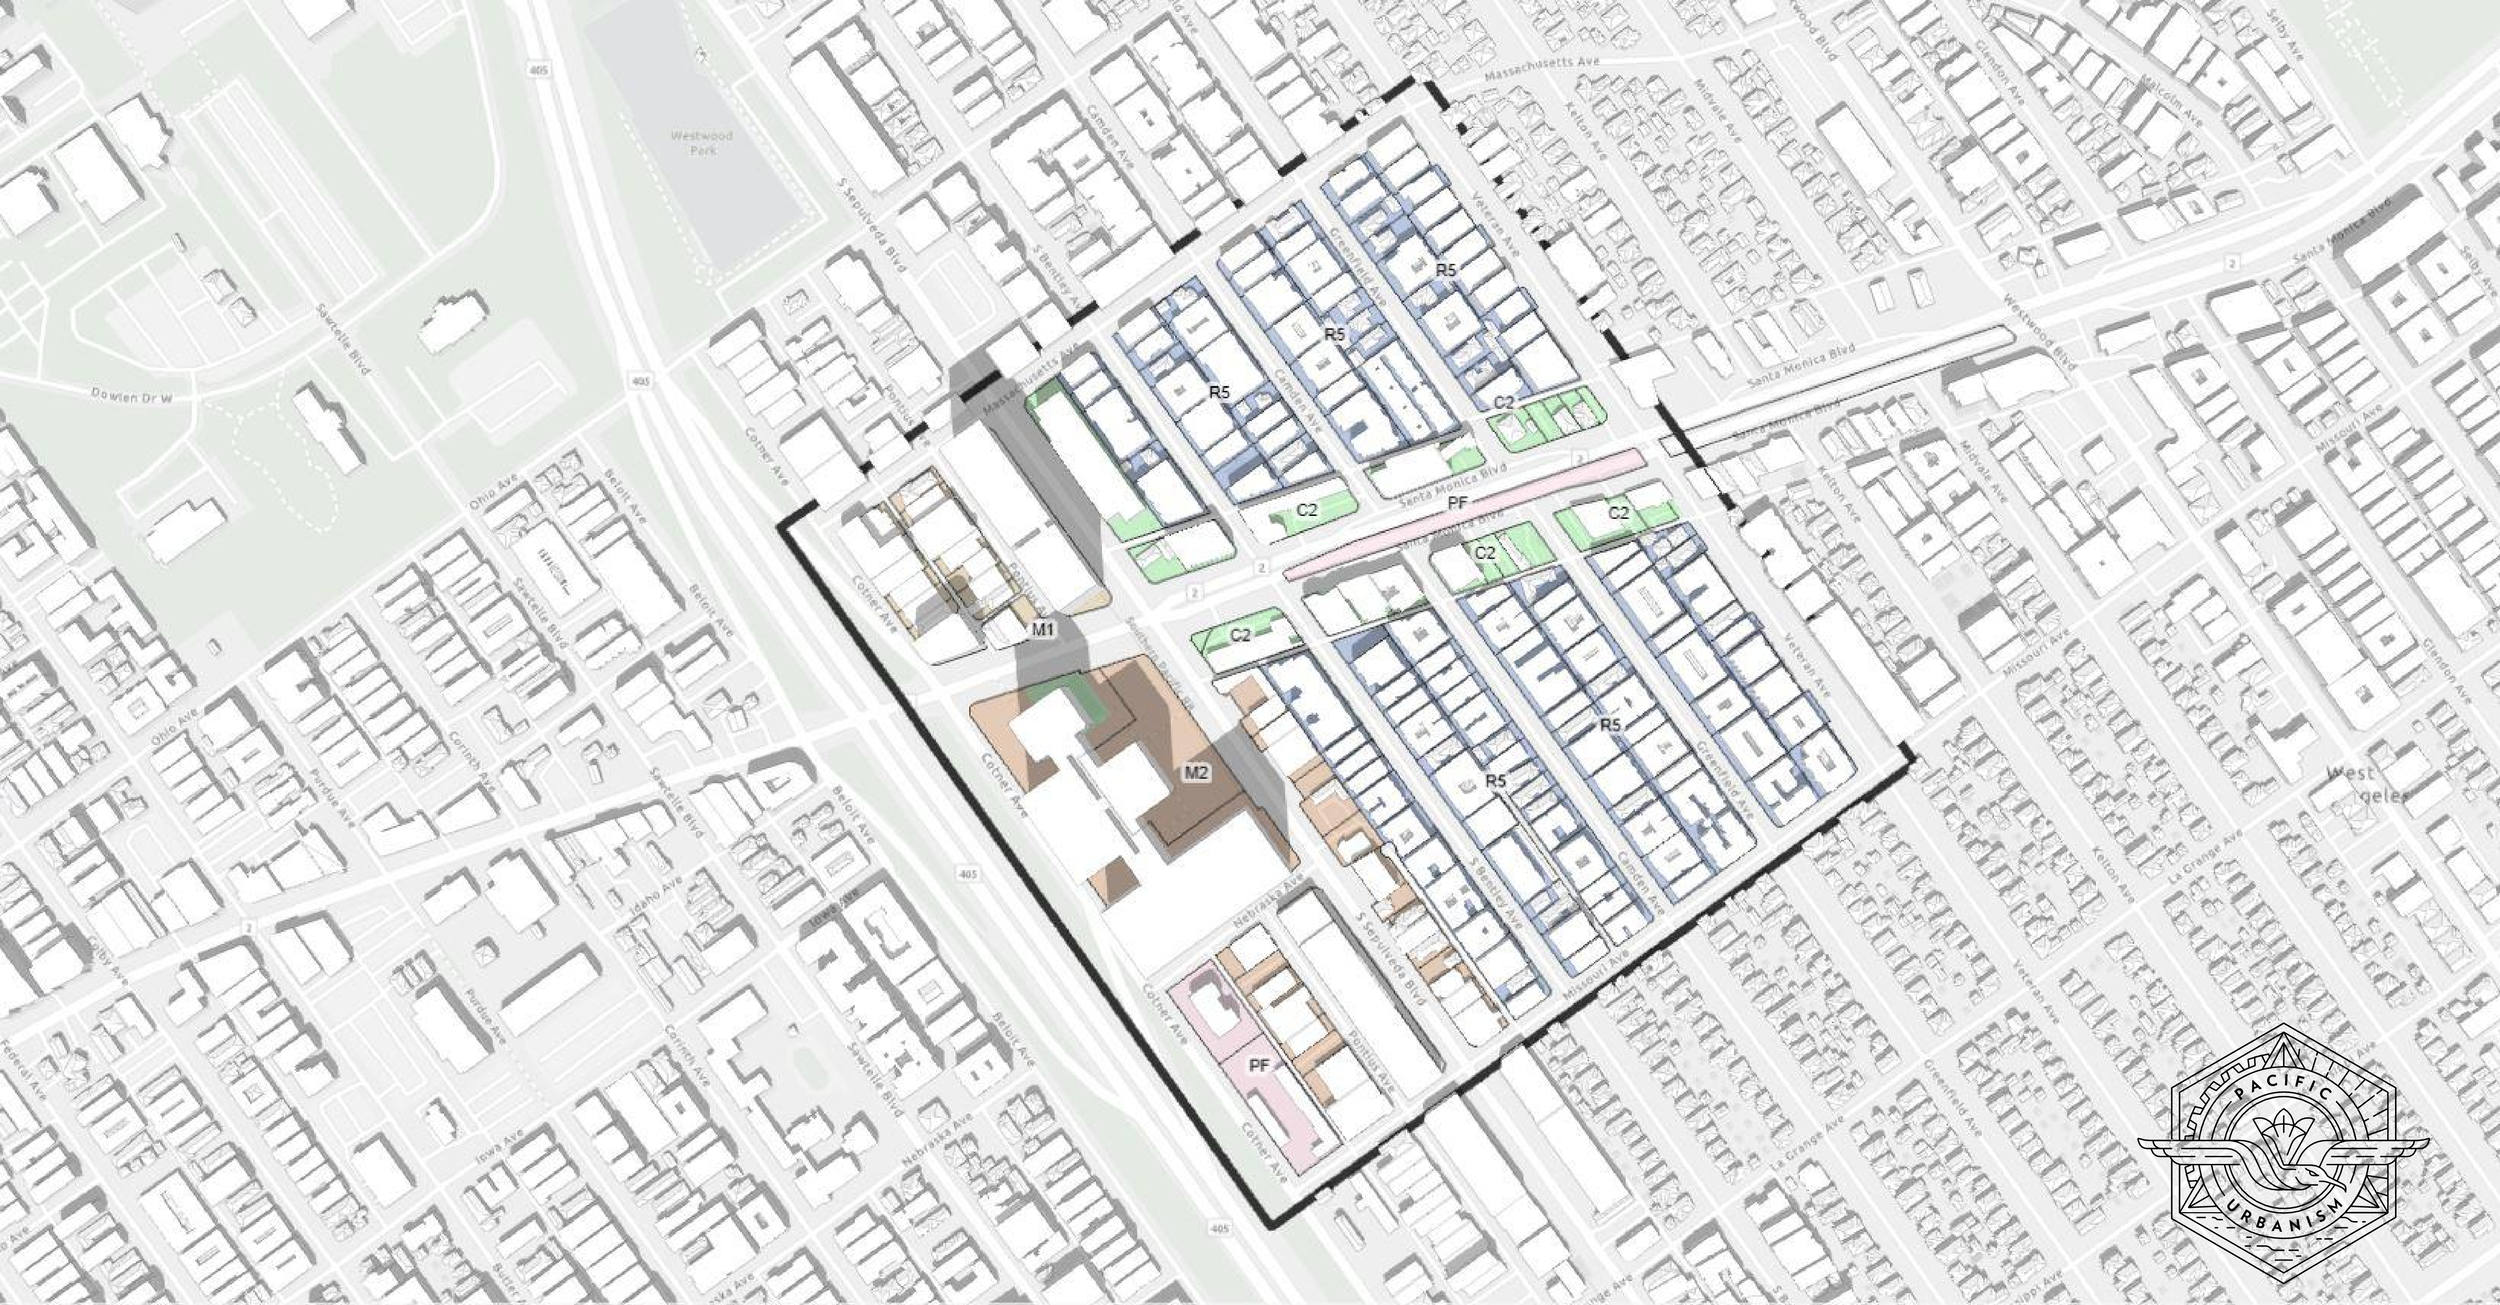 21 0108 ArcGIS Urban Rezoning Images Page 002.png